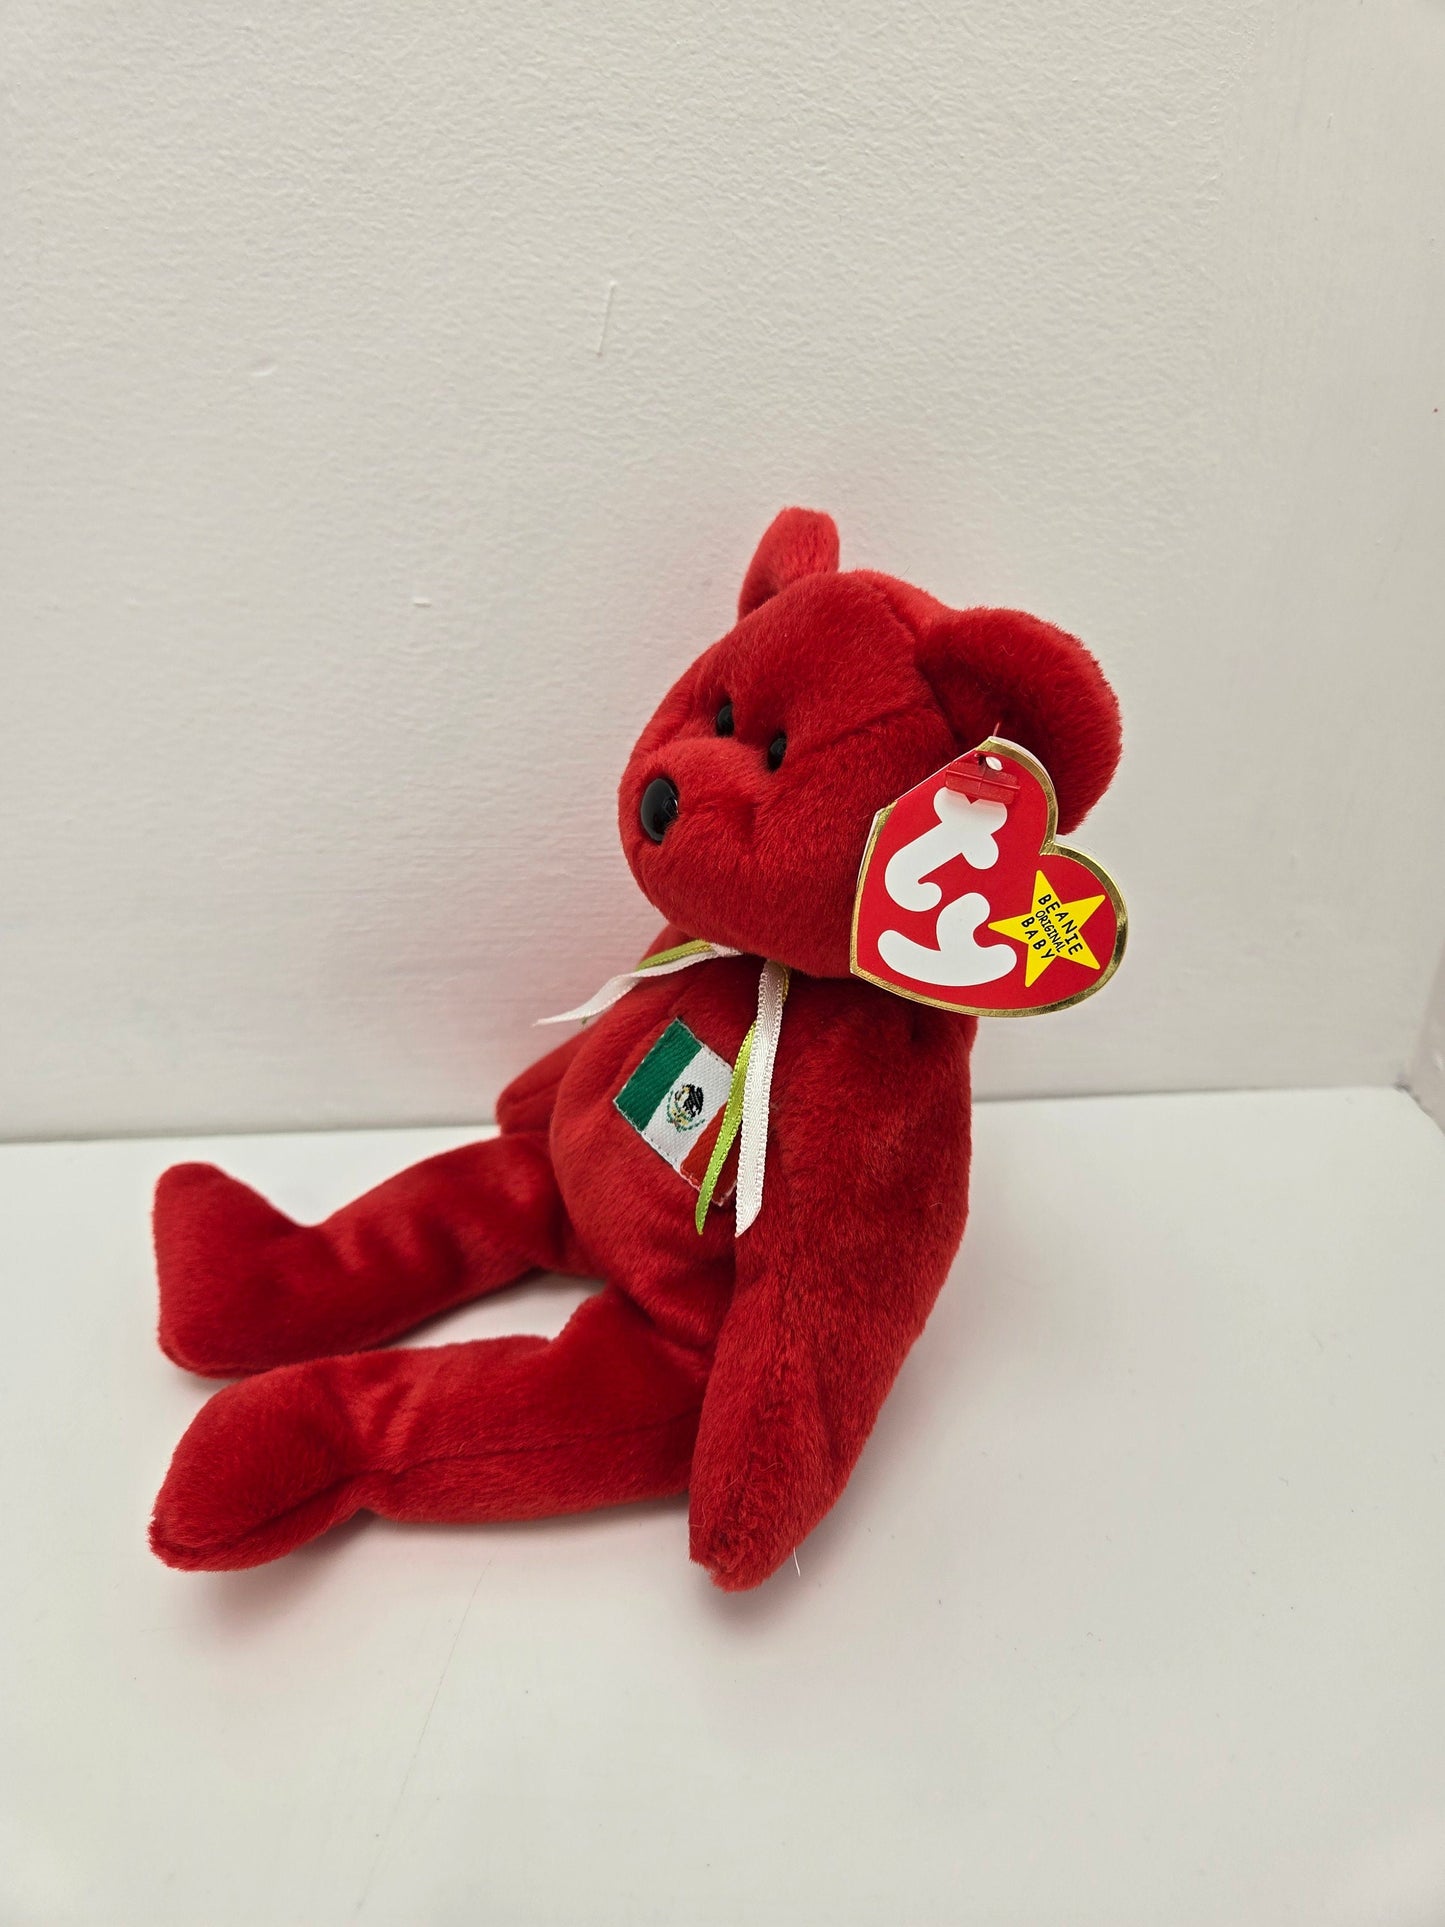 Ty Beanie Baby “Osito” the Red Mexico Bear wearing the Mexican flag proudly! (8.5 inch)